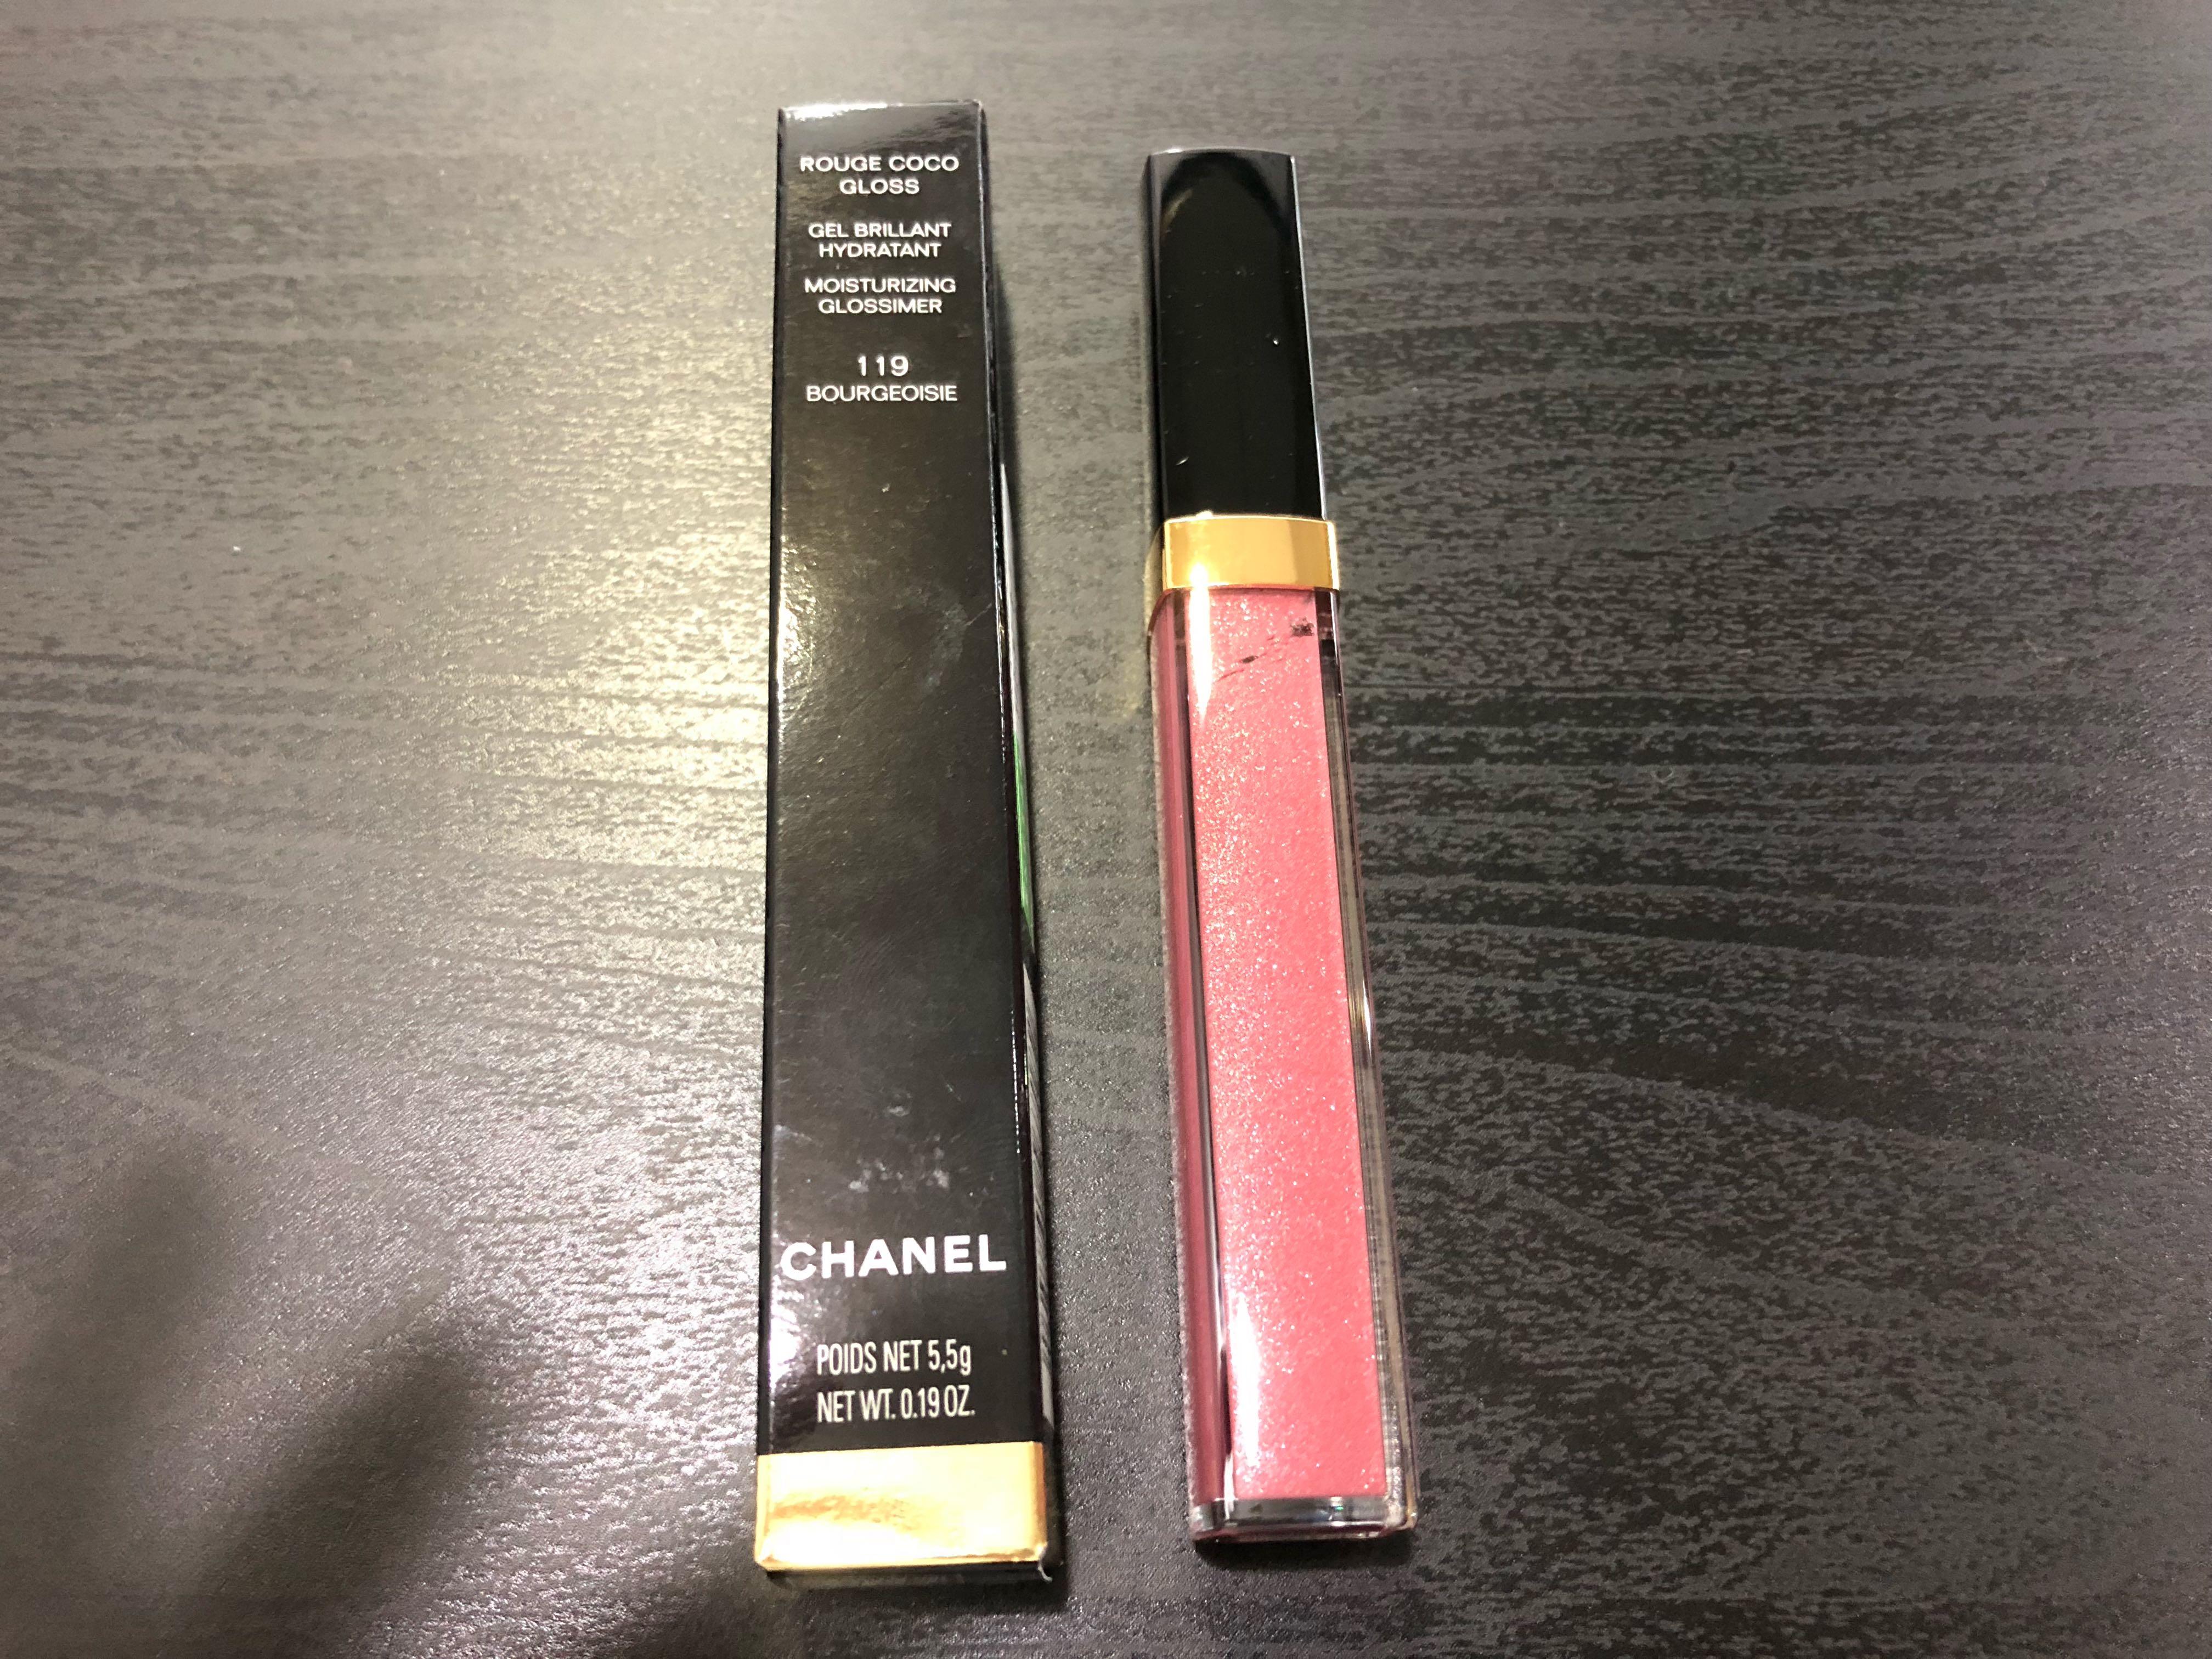 CHANEL ROUGE COCO GLOSS 119 BOURGEOISIE 187002855, Beauty